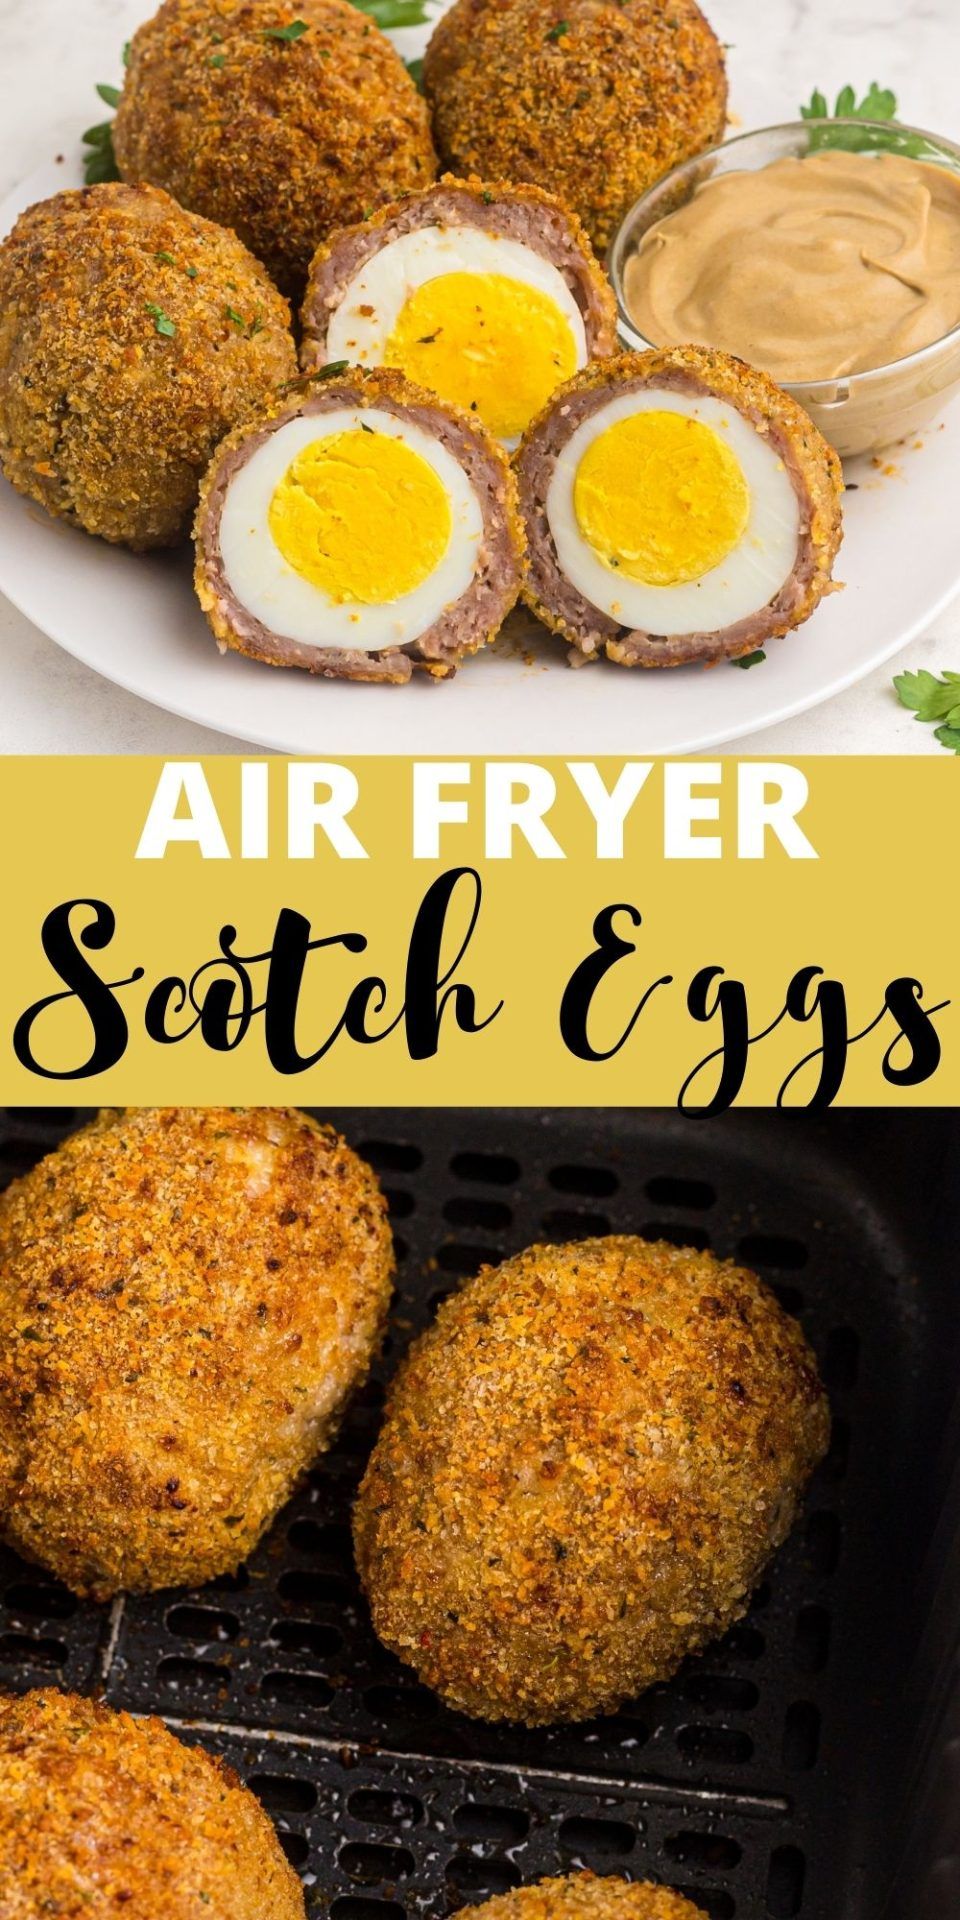 Air Fryer Scotch Eggs are an easy meal, with a crispy crust, making them a perfect snack or quick breakfast.